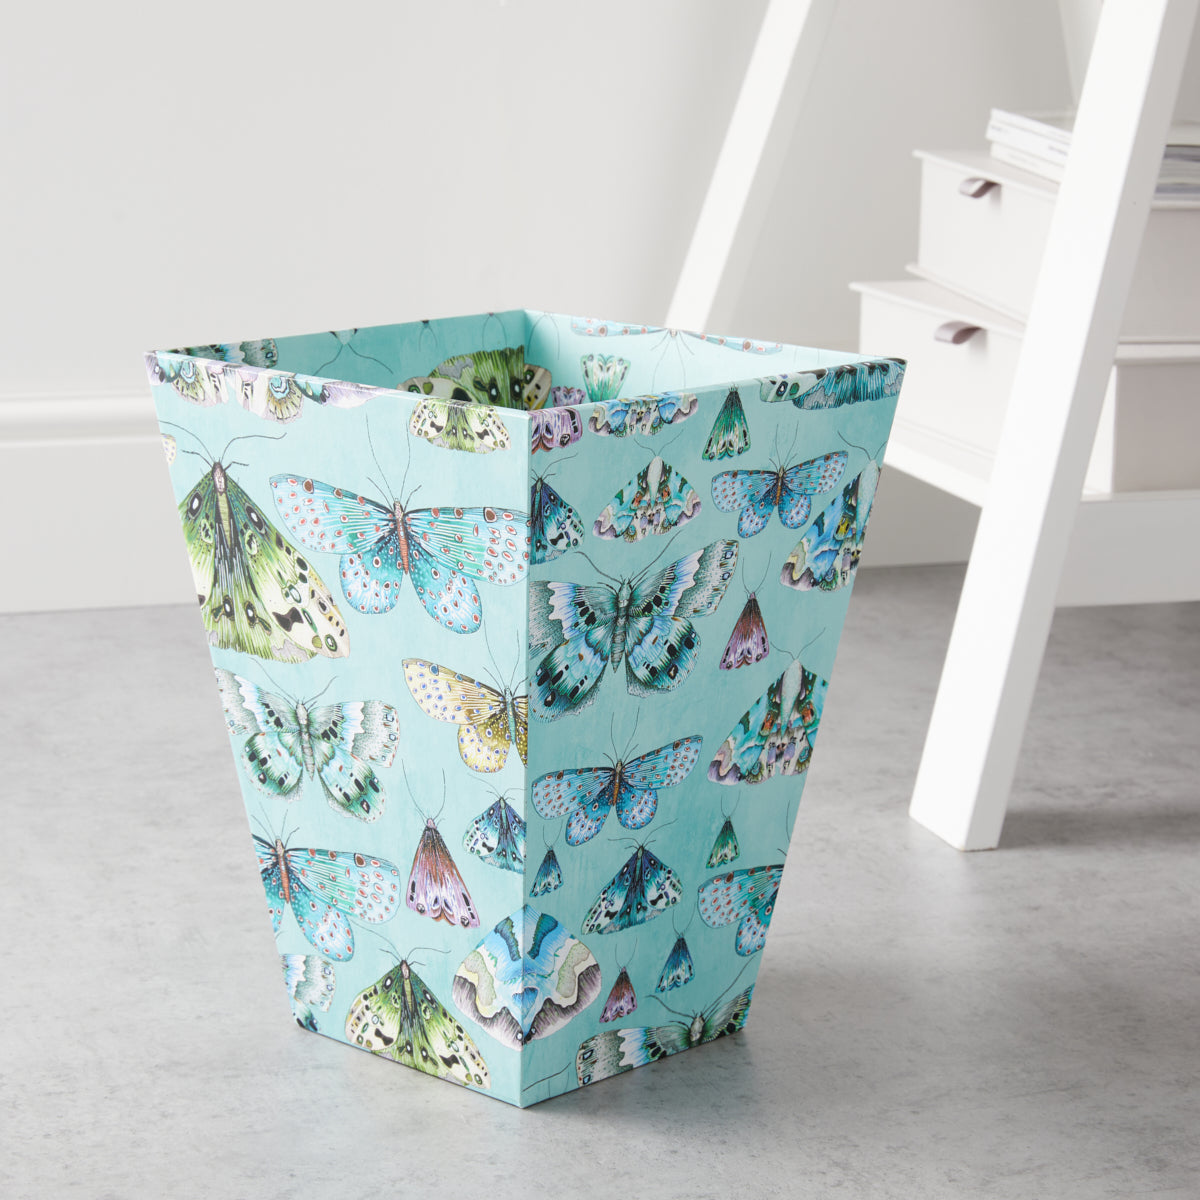 Send Your Own Paper Waste Paper Bins